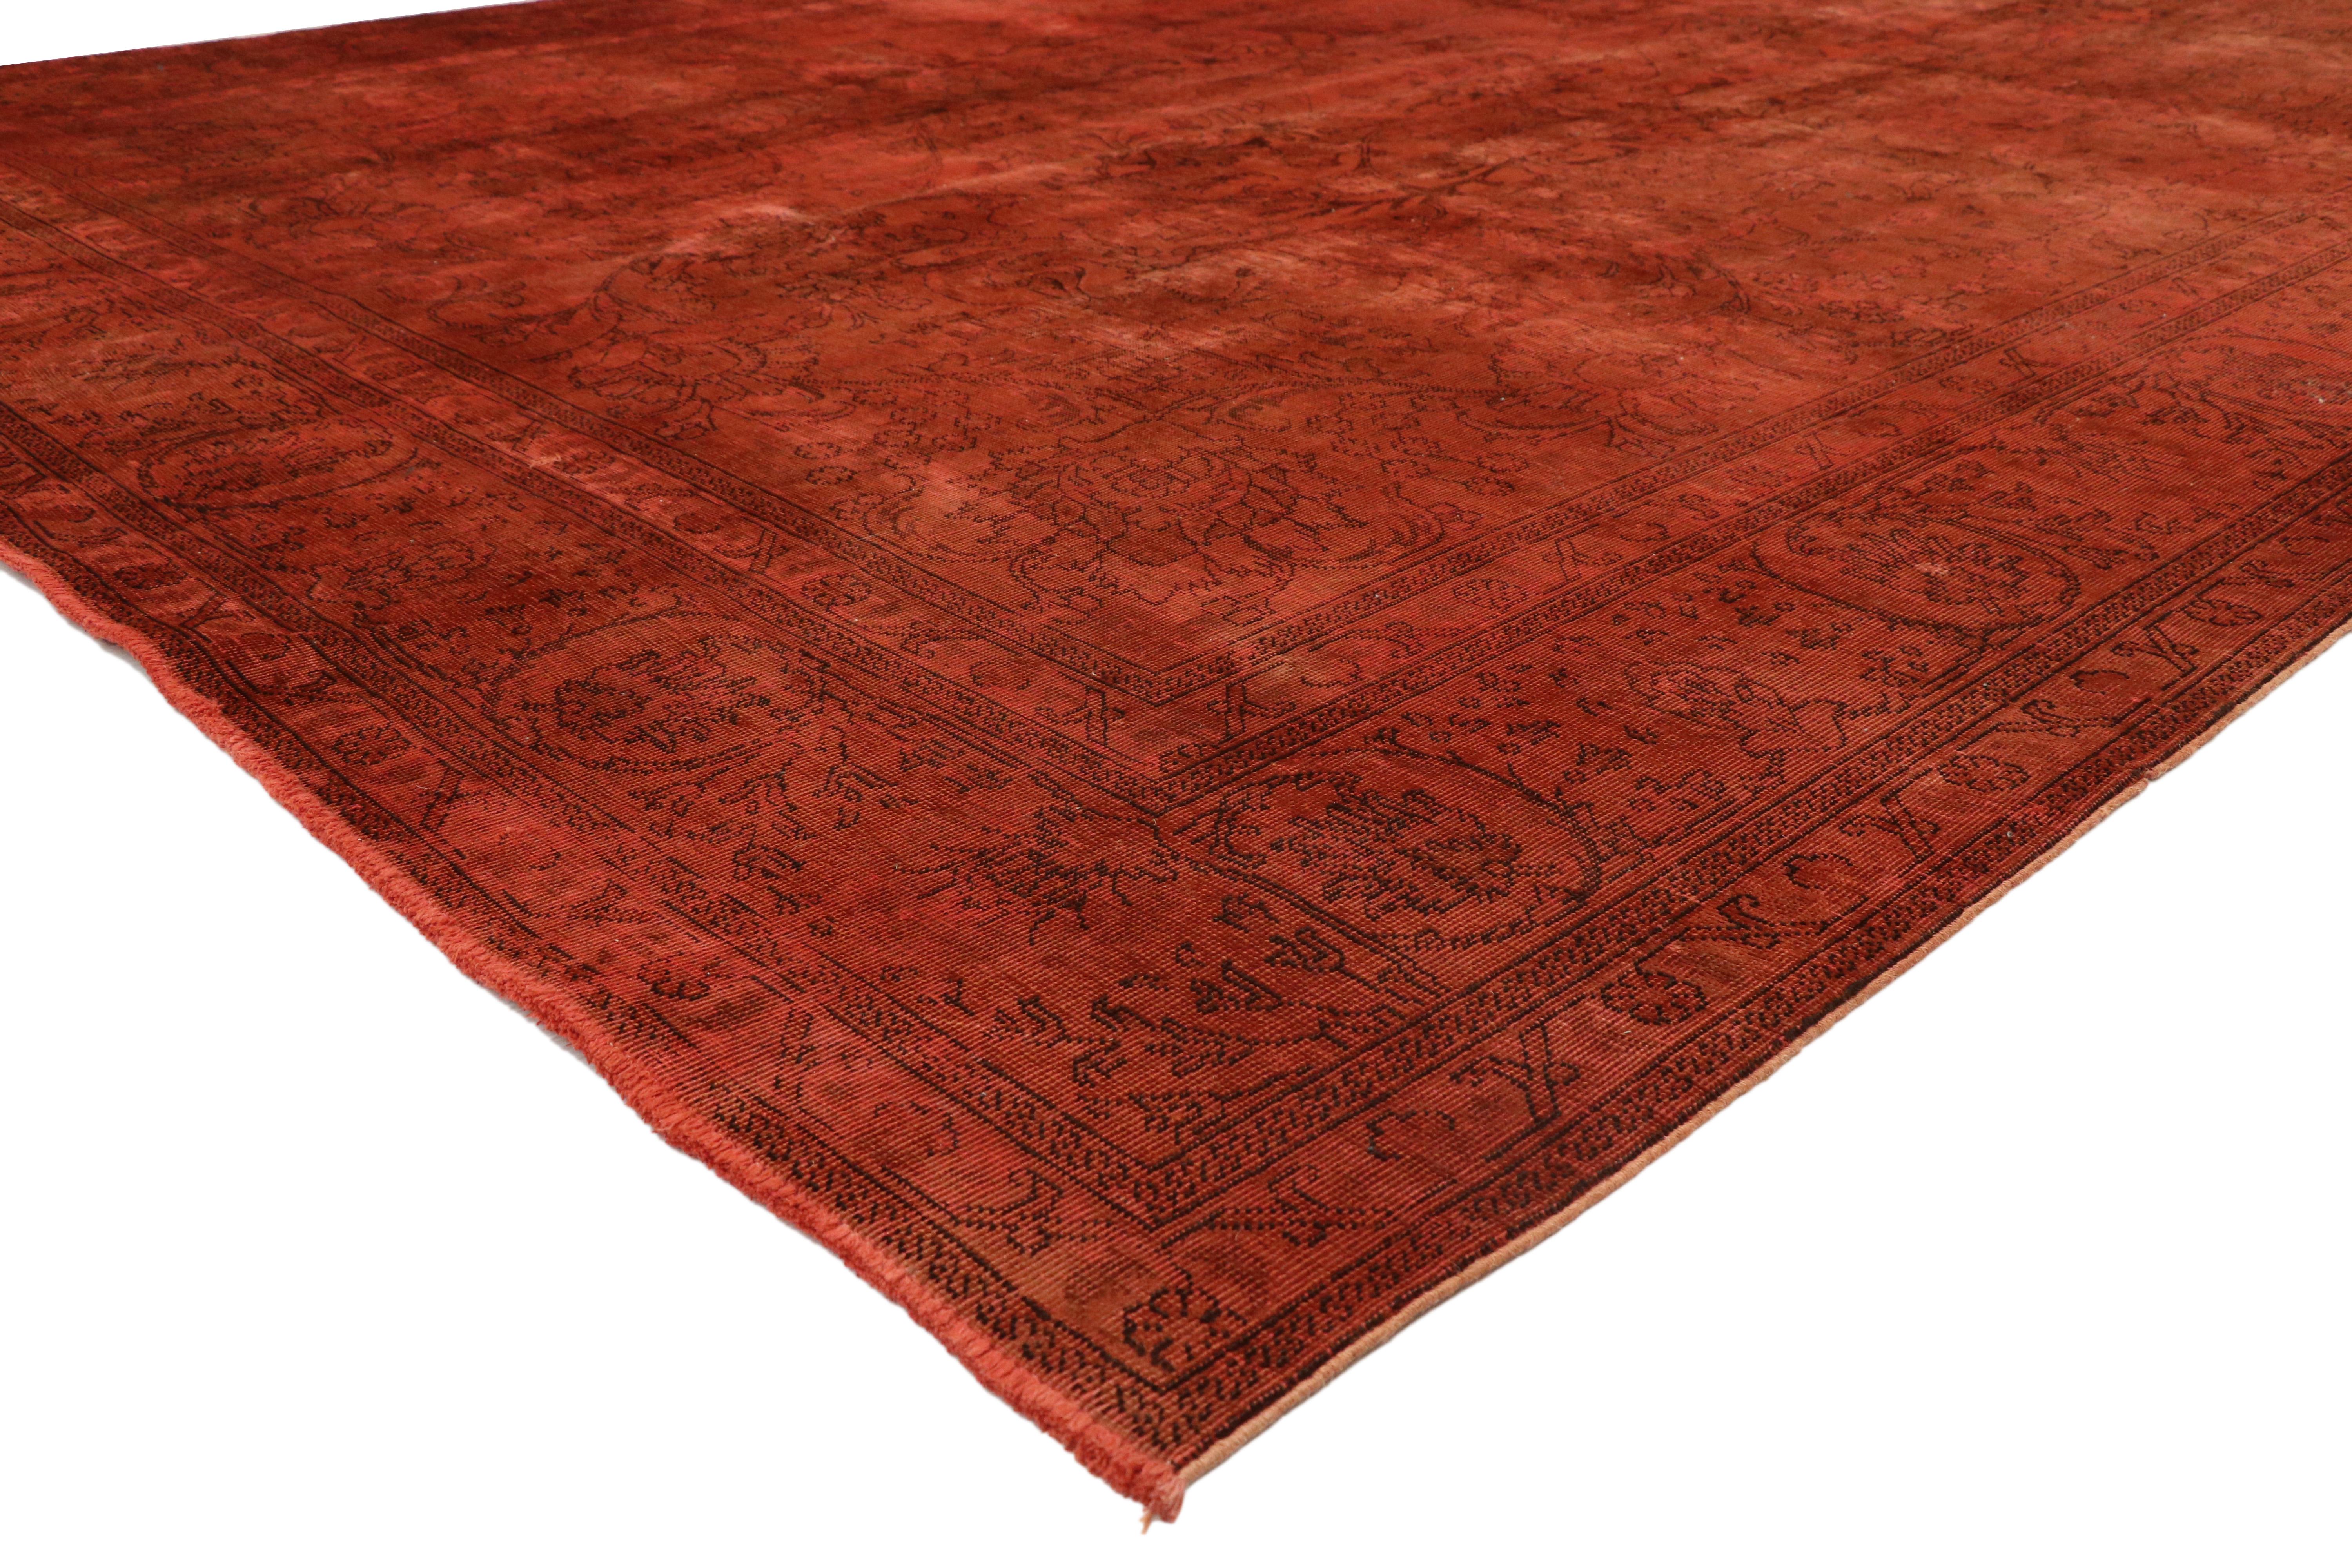 80318 Distressed Overdyed Red Persian Area Rug with Contemporary Modern Style. Color pattern and an intimate patina, this distressed overdyed red Persian rug displays a contemporary modern style. With its distressed composition, luxurious blend of